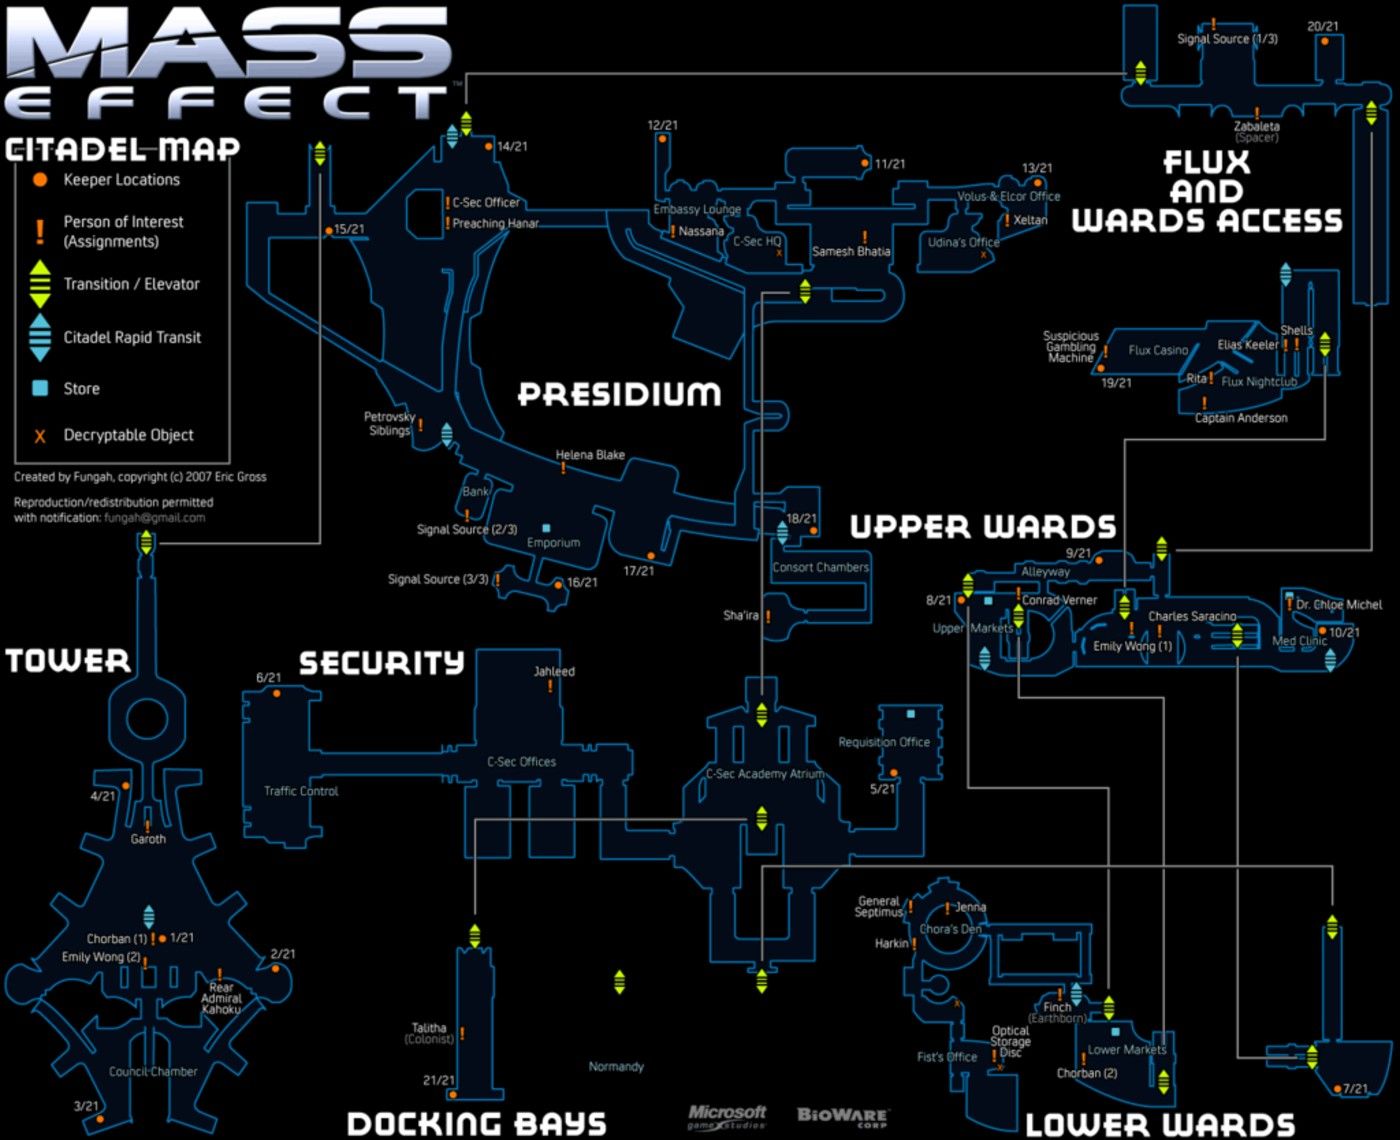 Mass Effect Every Keeper Location on the Citadel (& How to Scan Them)